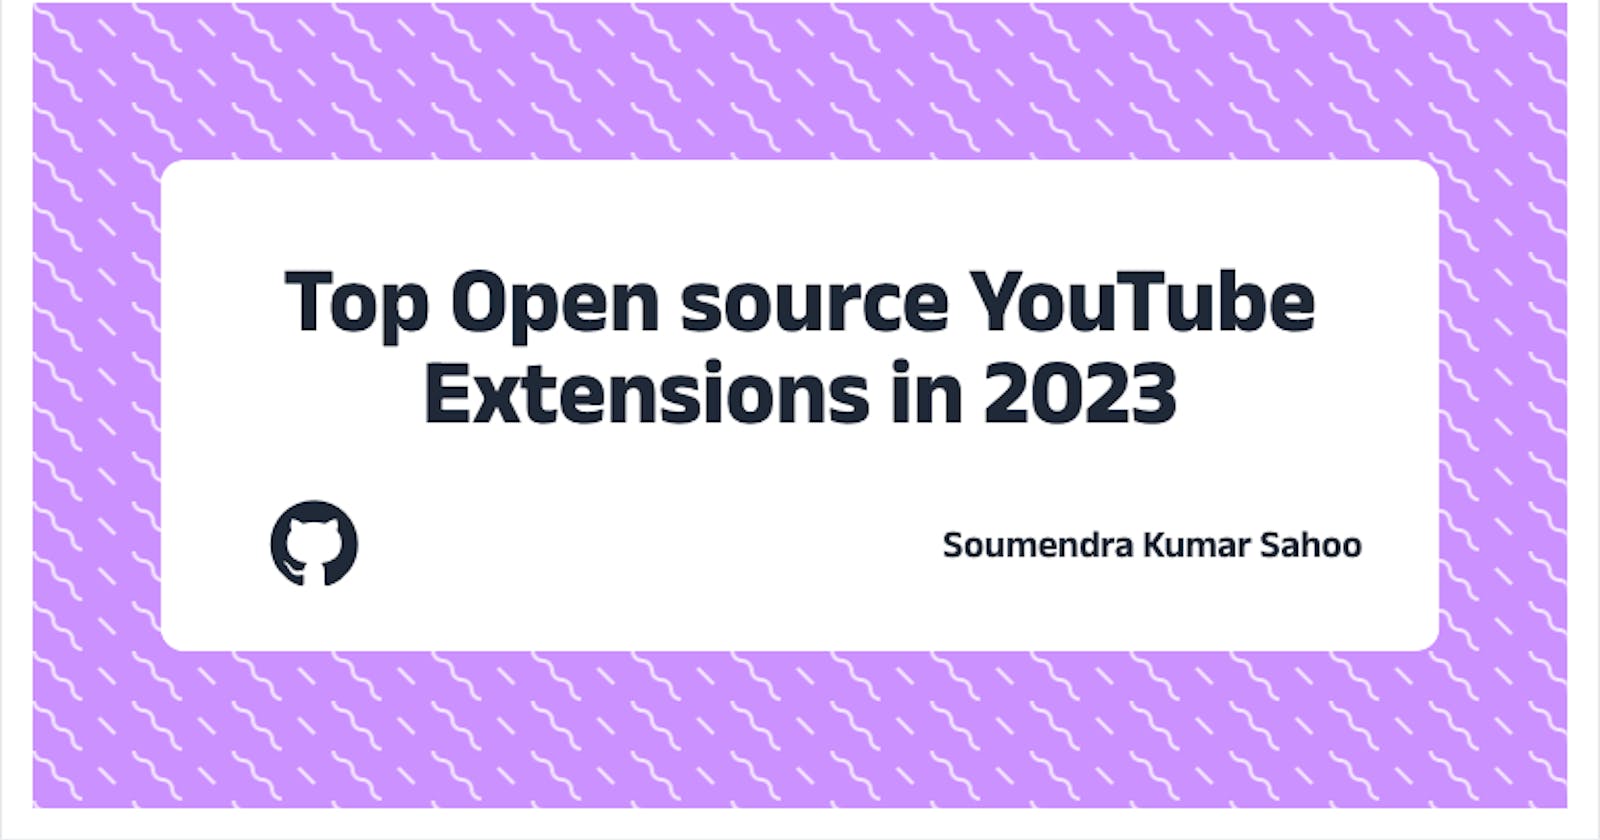 Top Open source YouTube Extensions in 2023